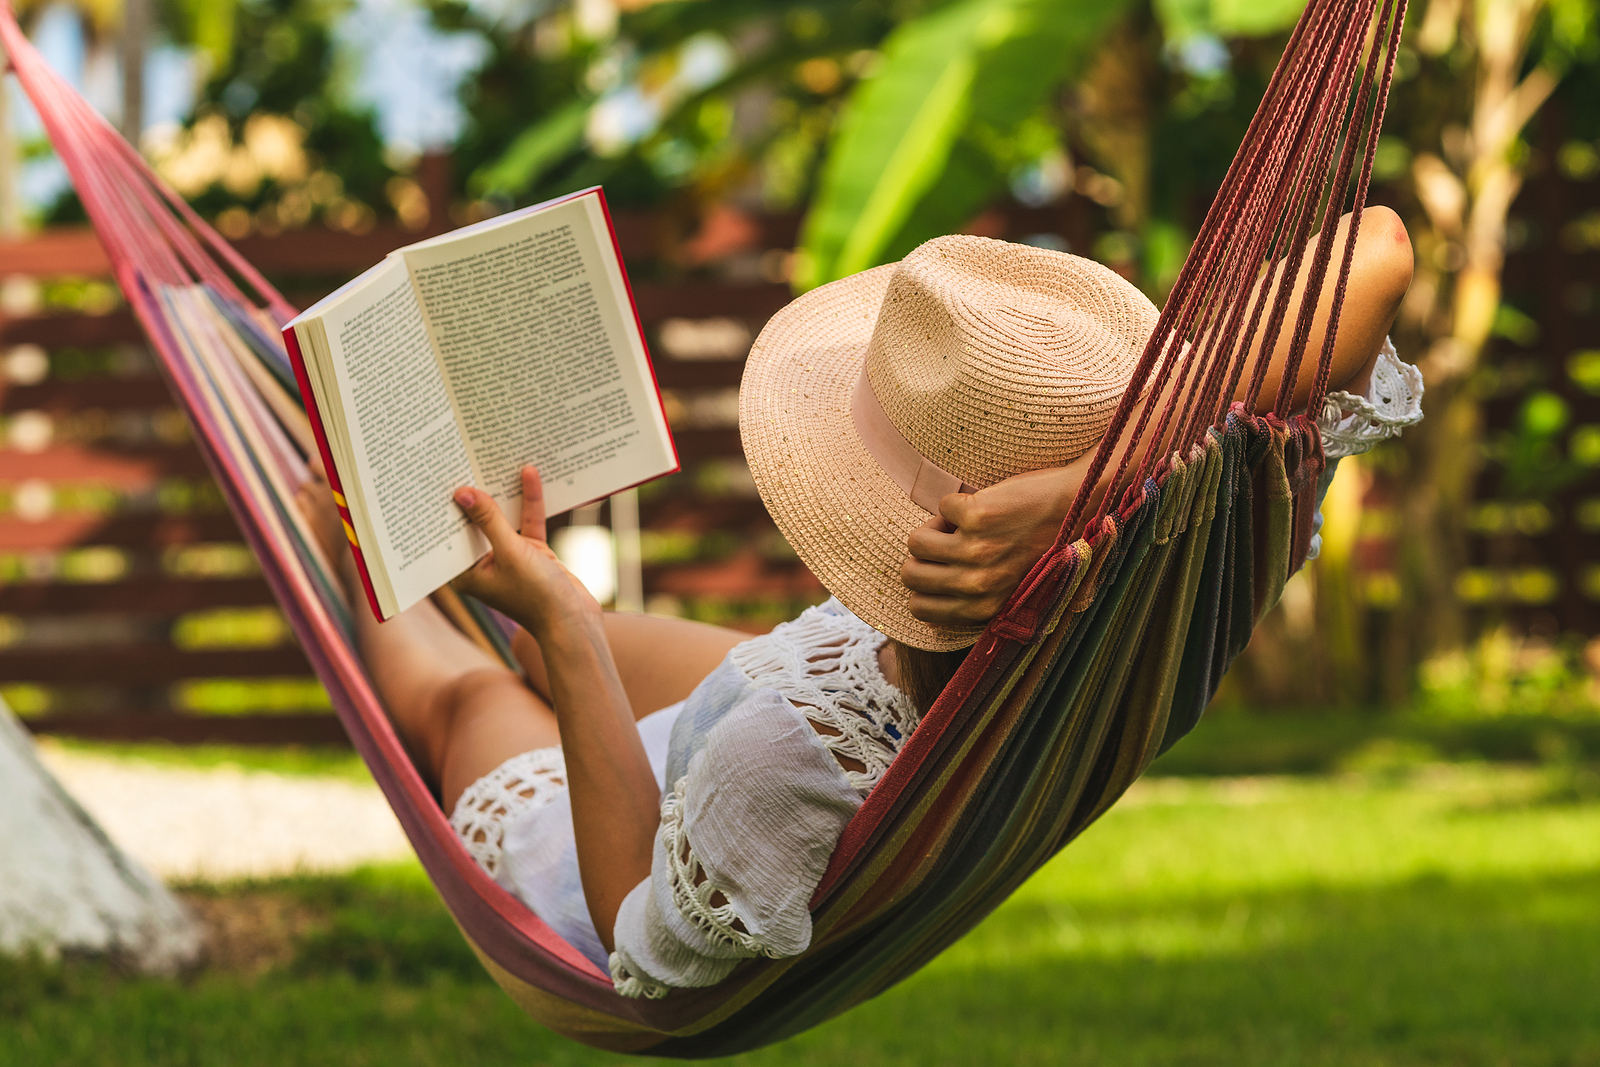 Summer Reading Recommendations